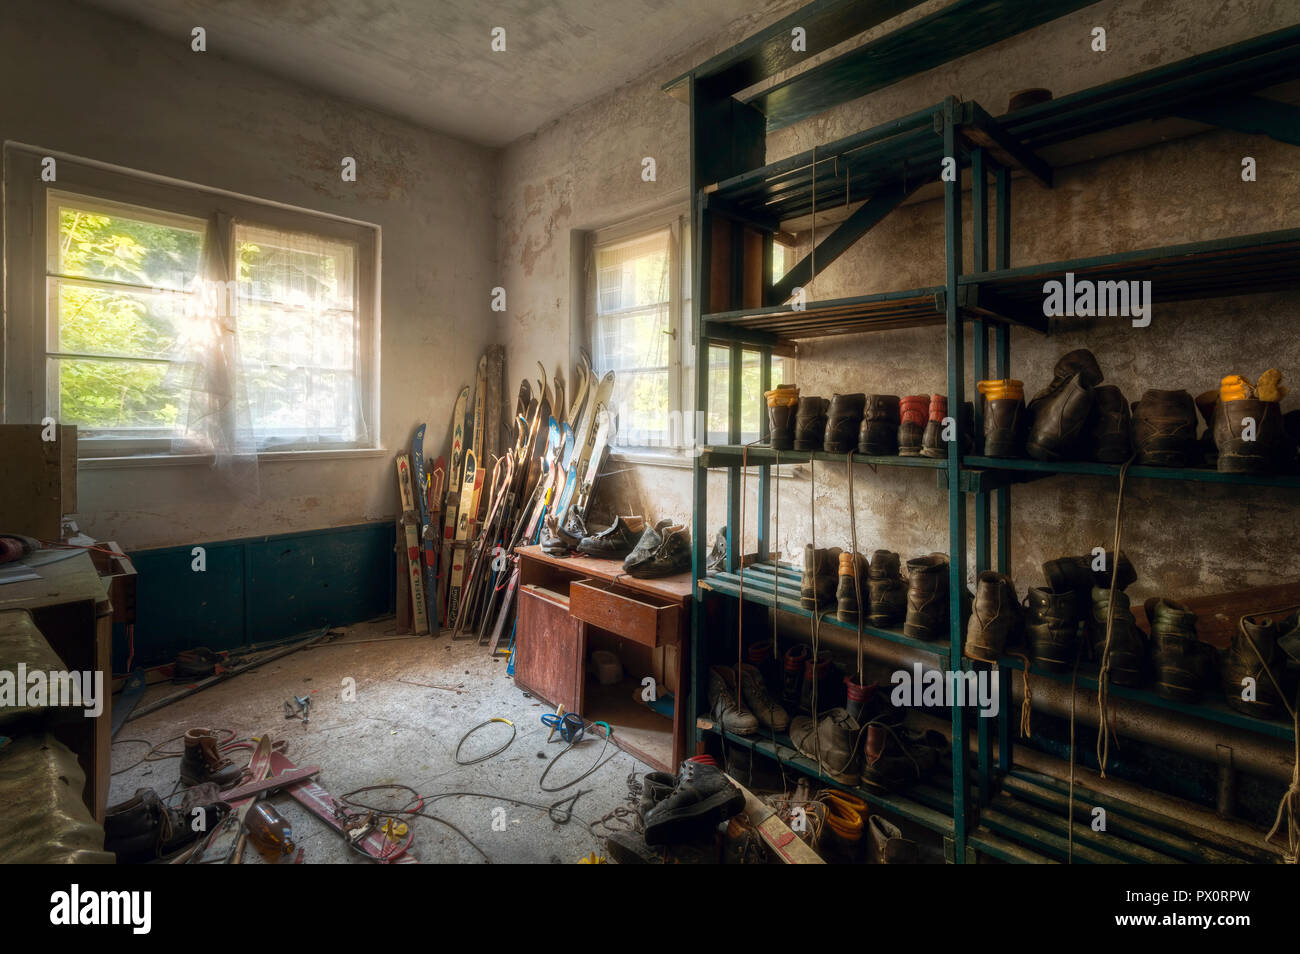 Interior view of the ski storage in an abandoned hotel in Germany. Stock Photo